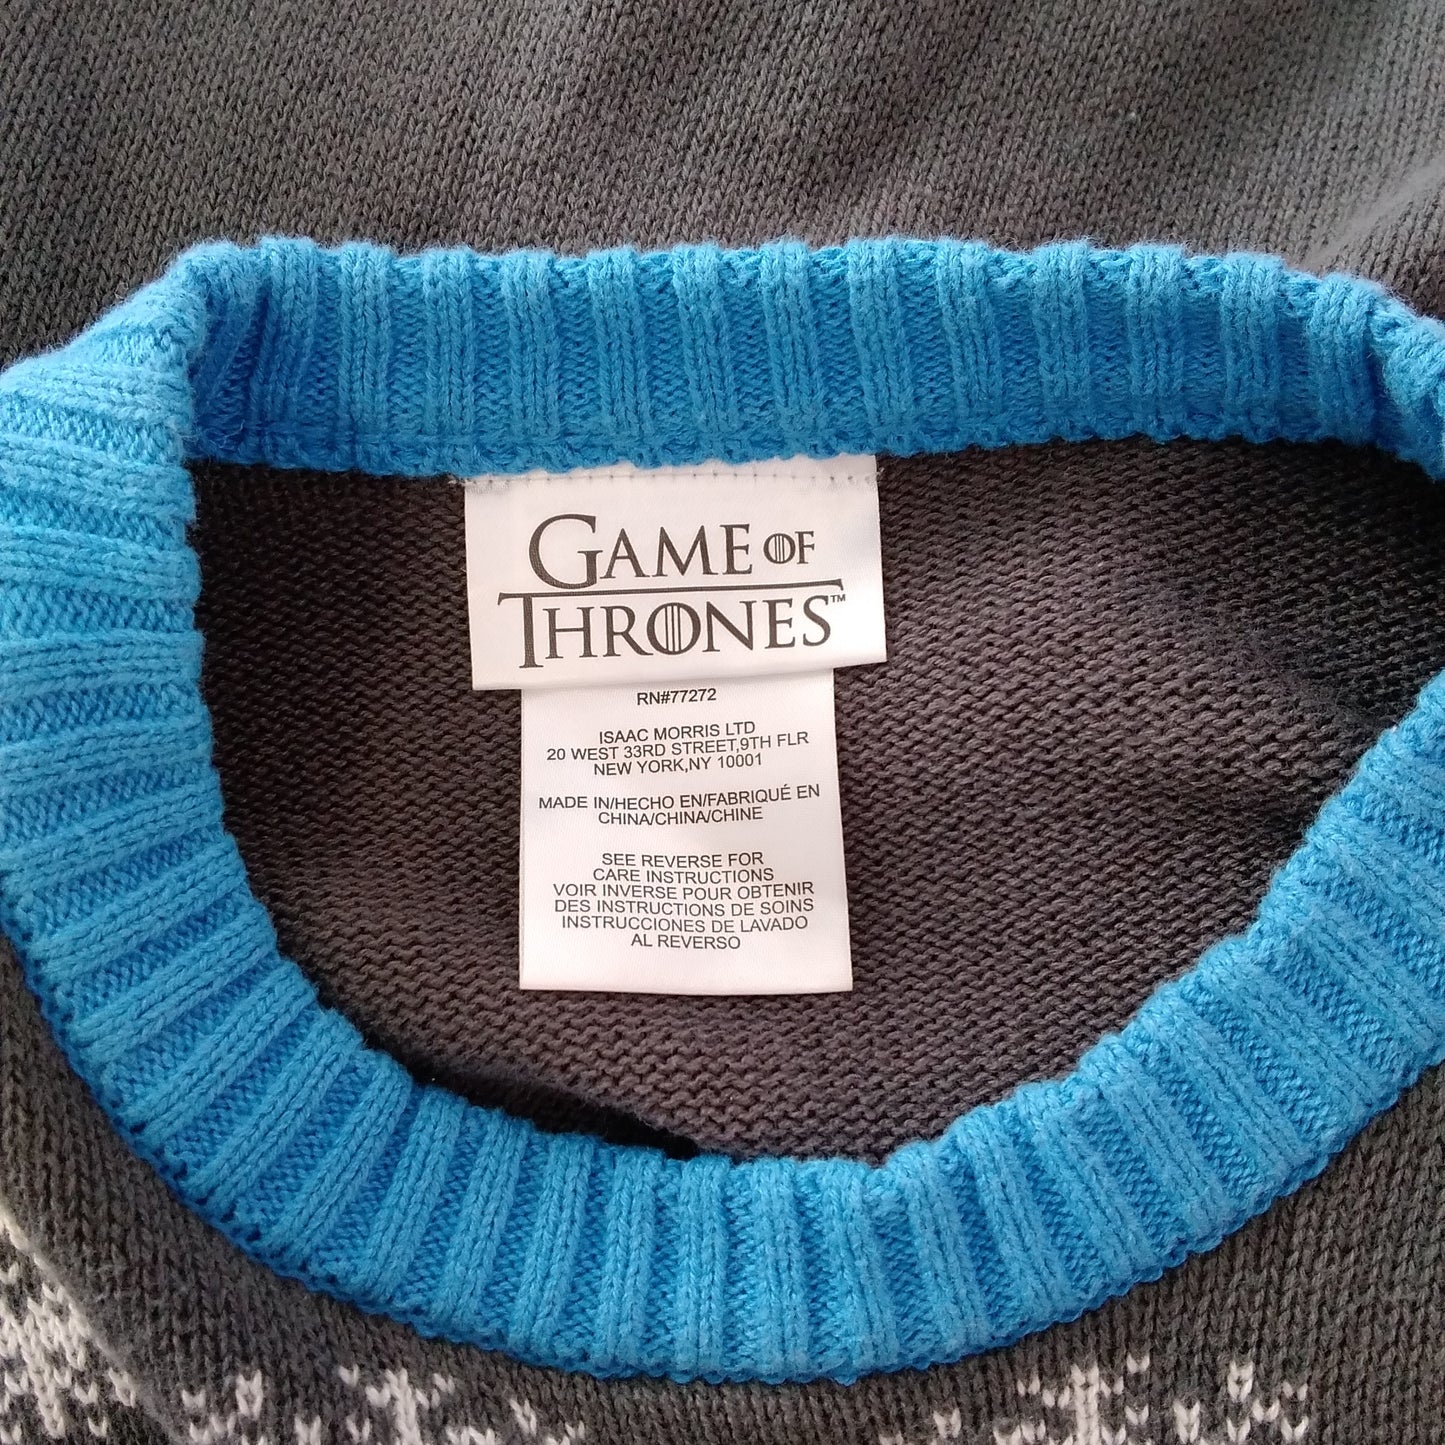 Game of Thrones Silent Night King Christmas Sweater - Size S